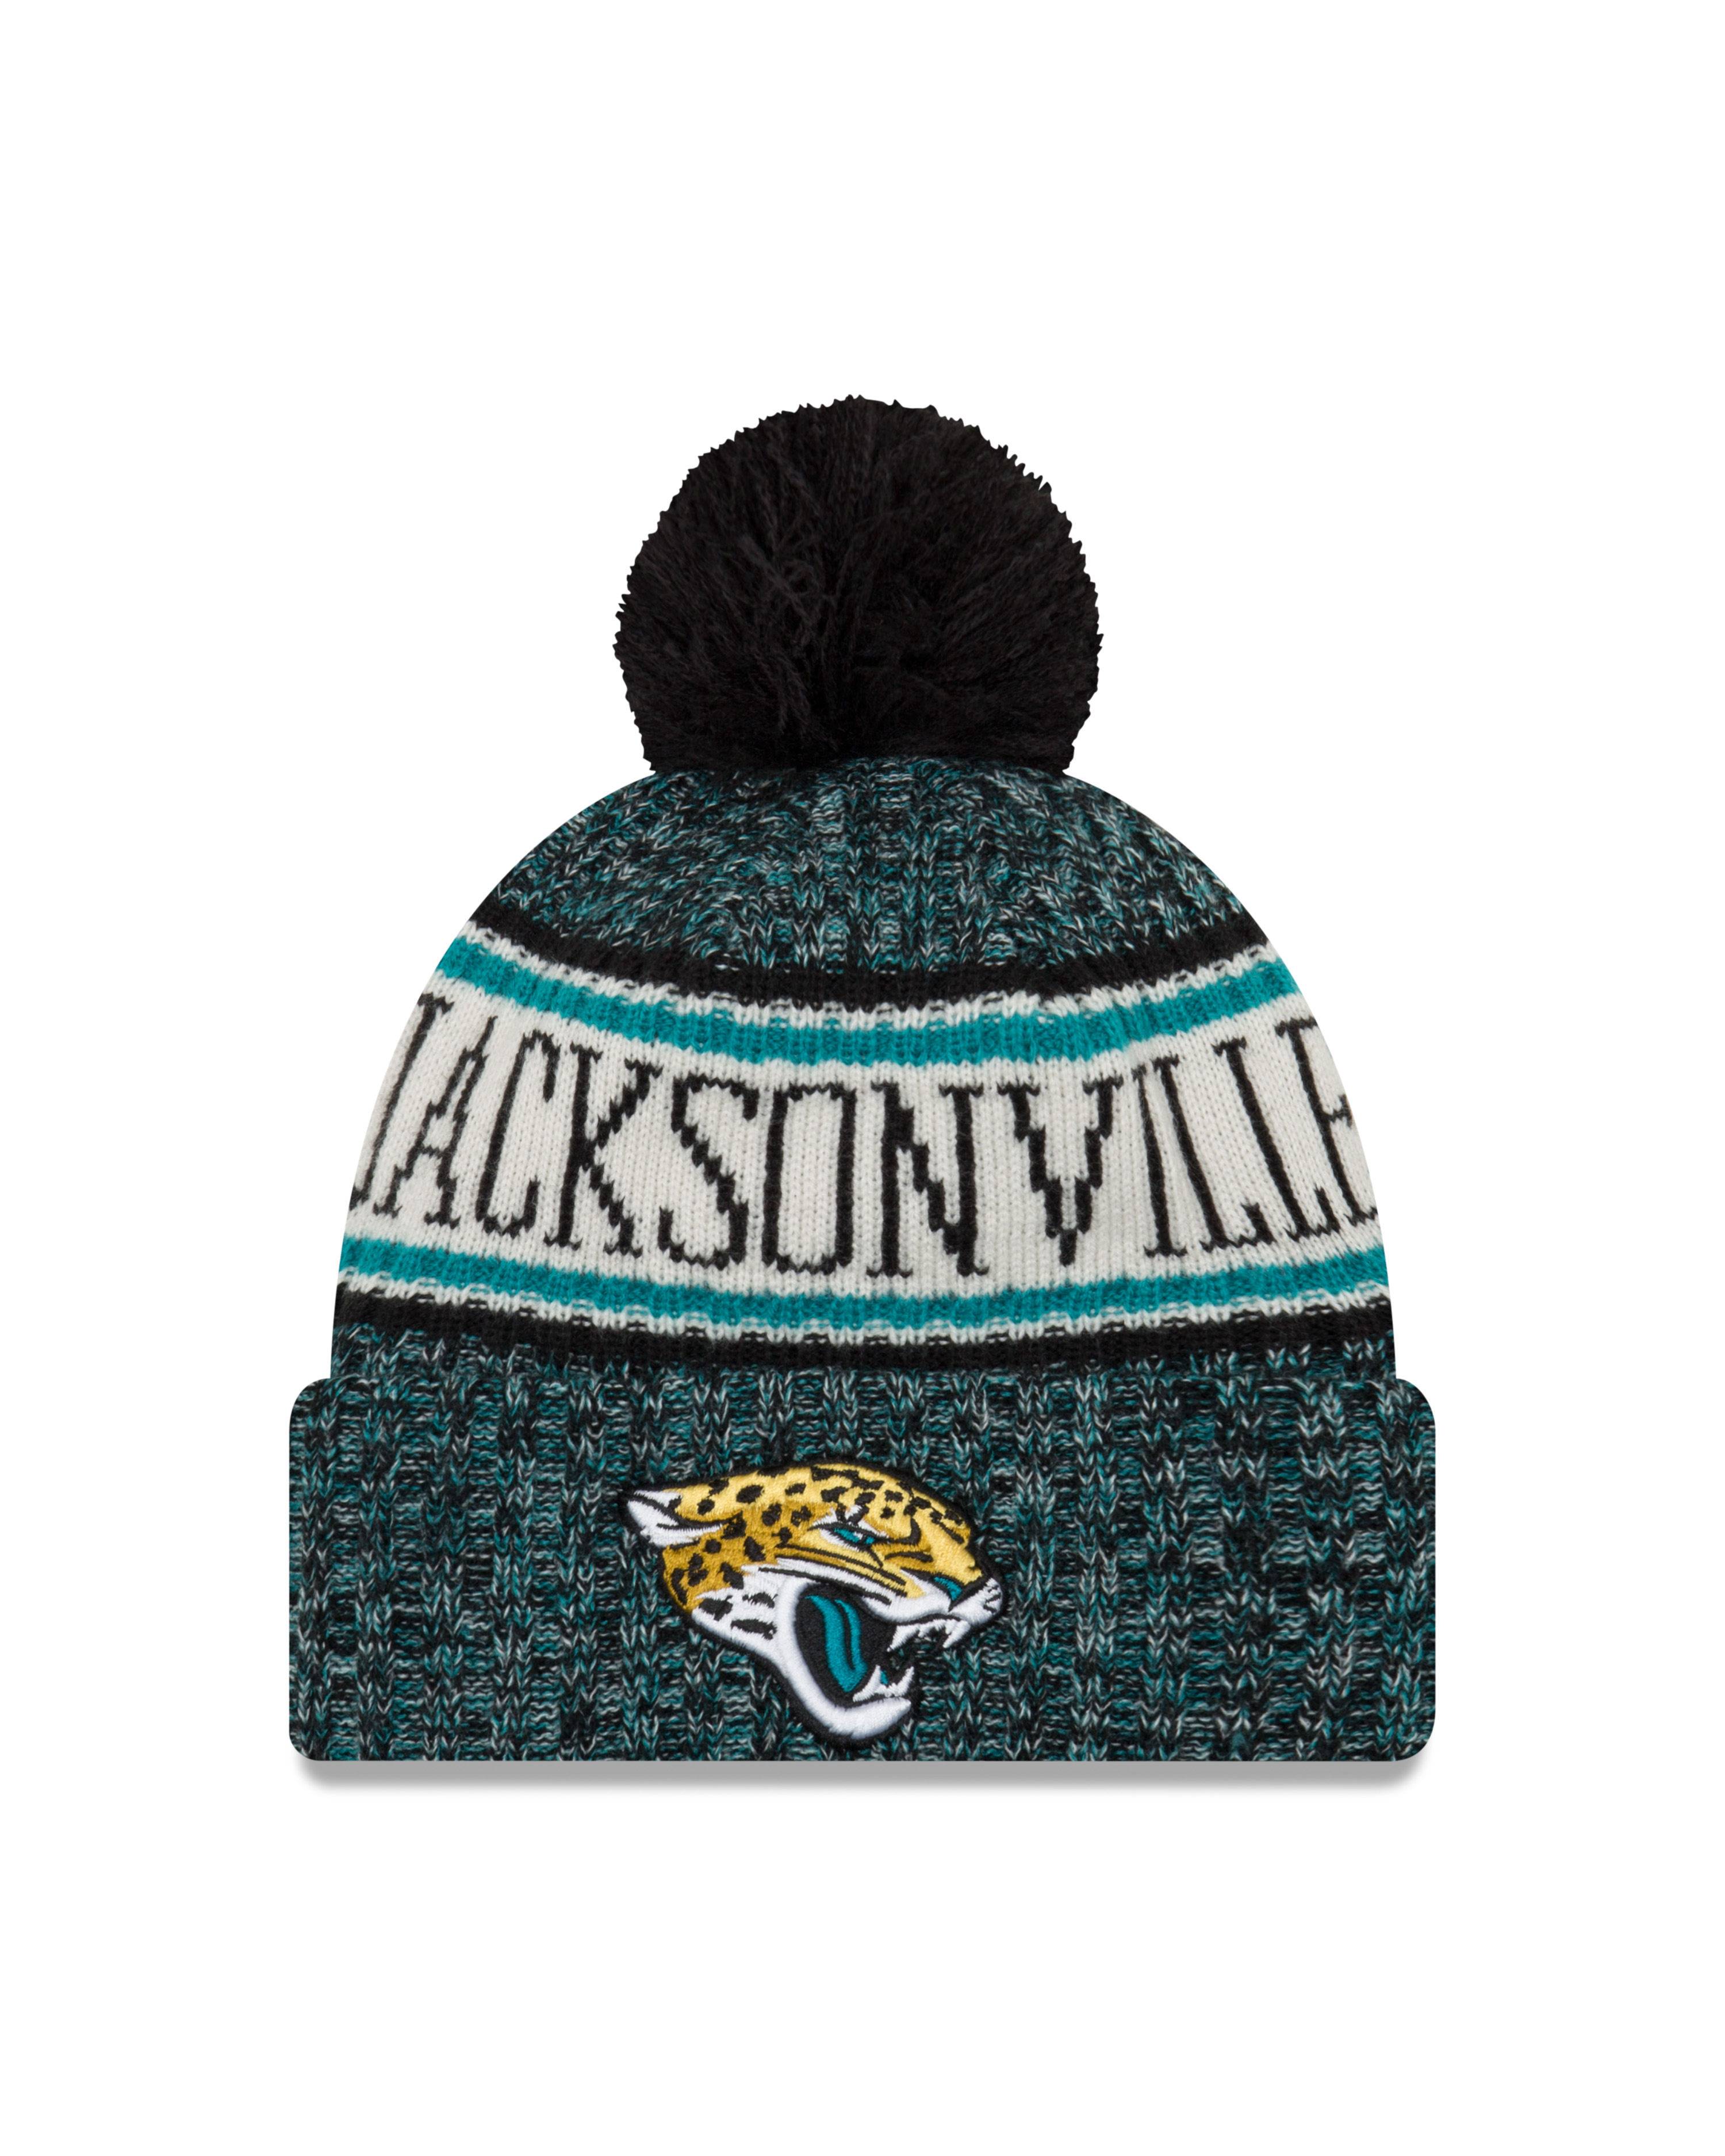 New Era Official NFL Cold Weather Collection #49